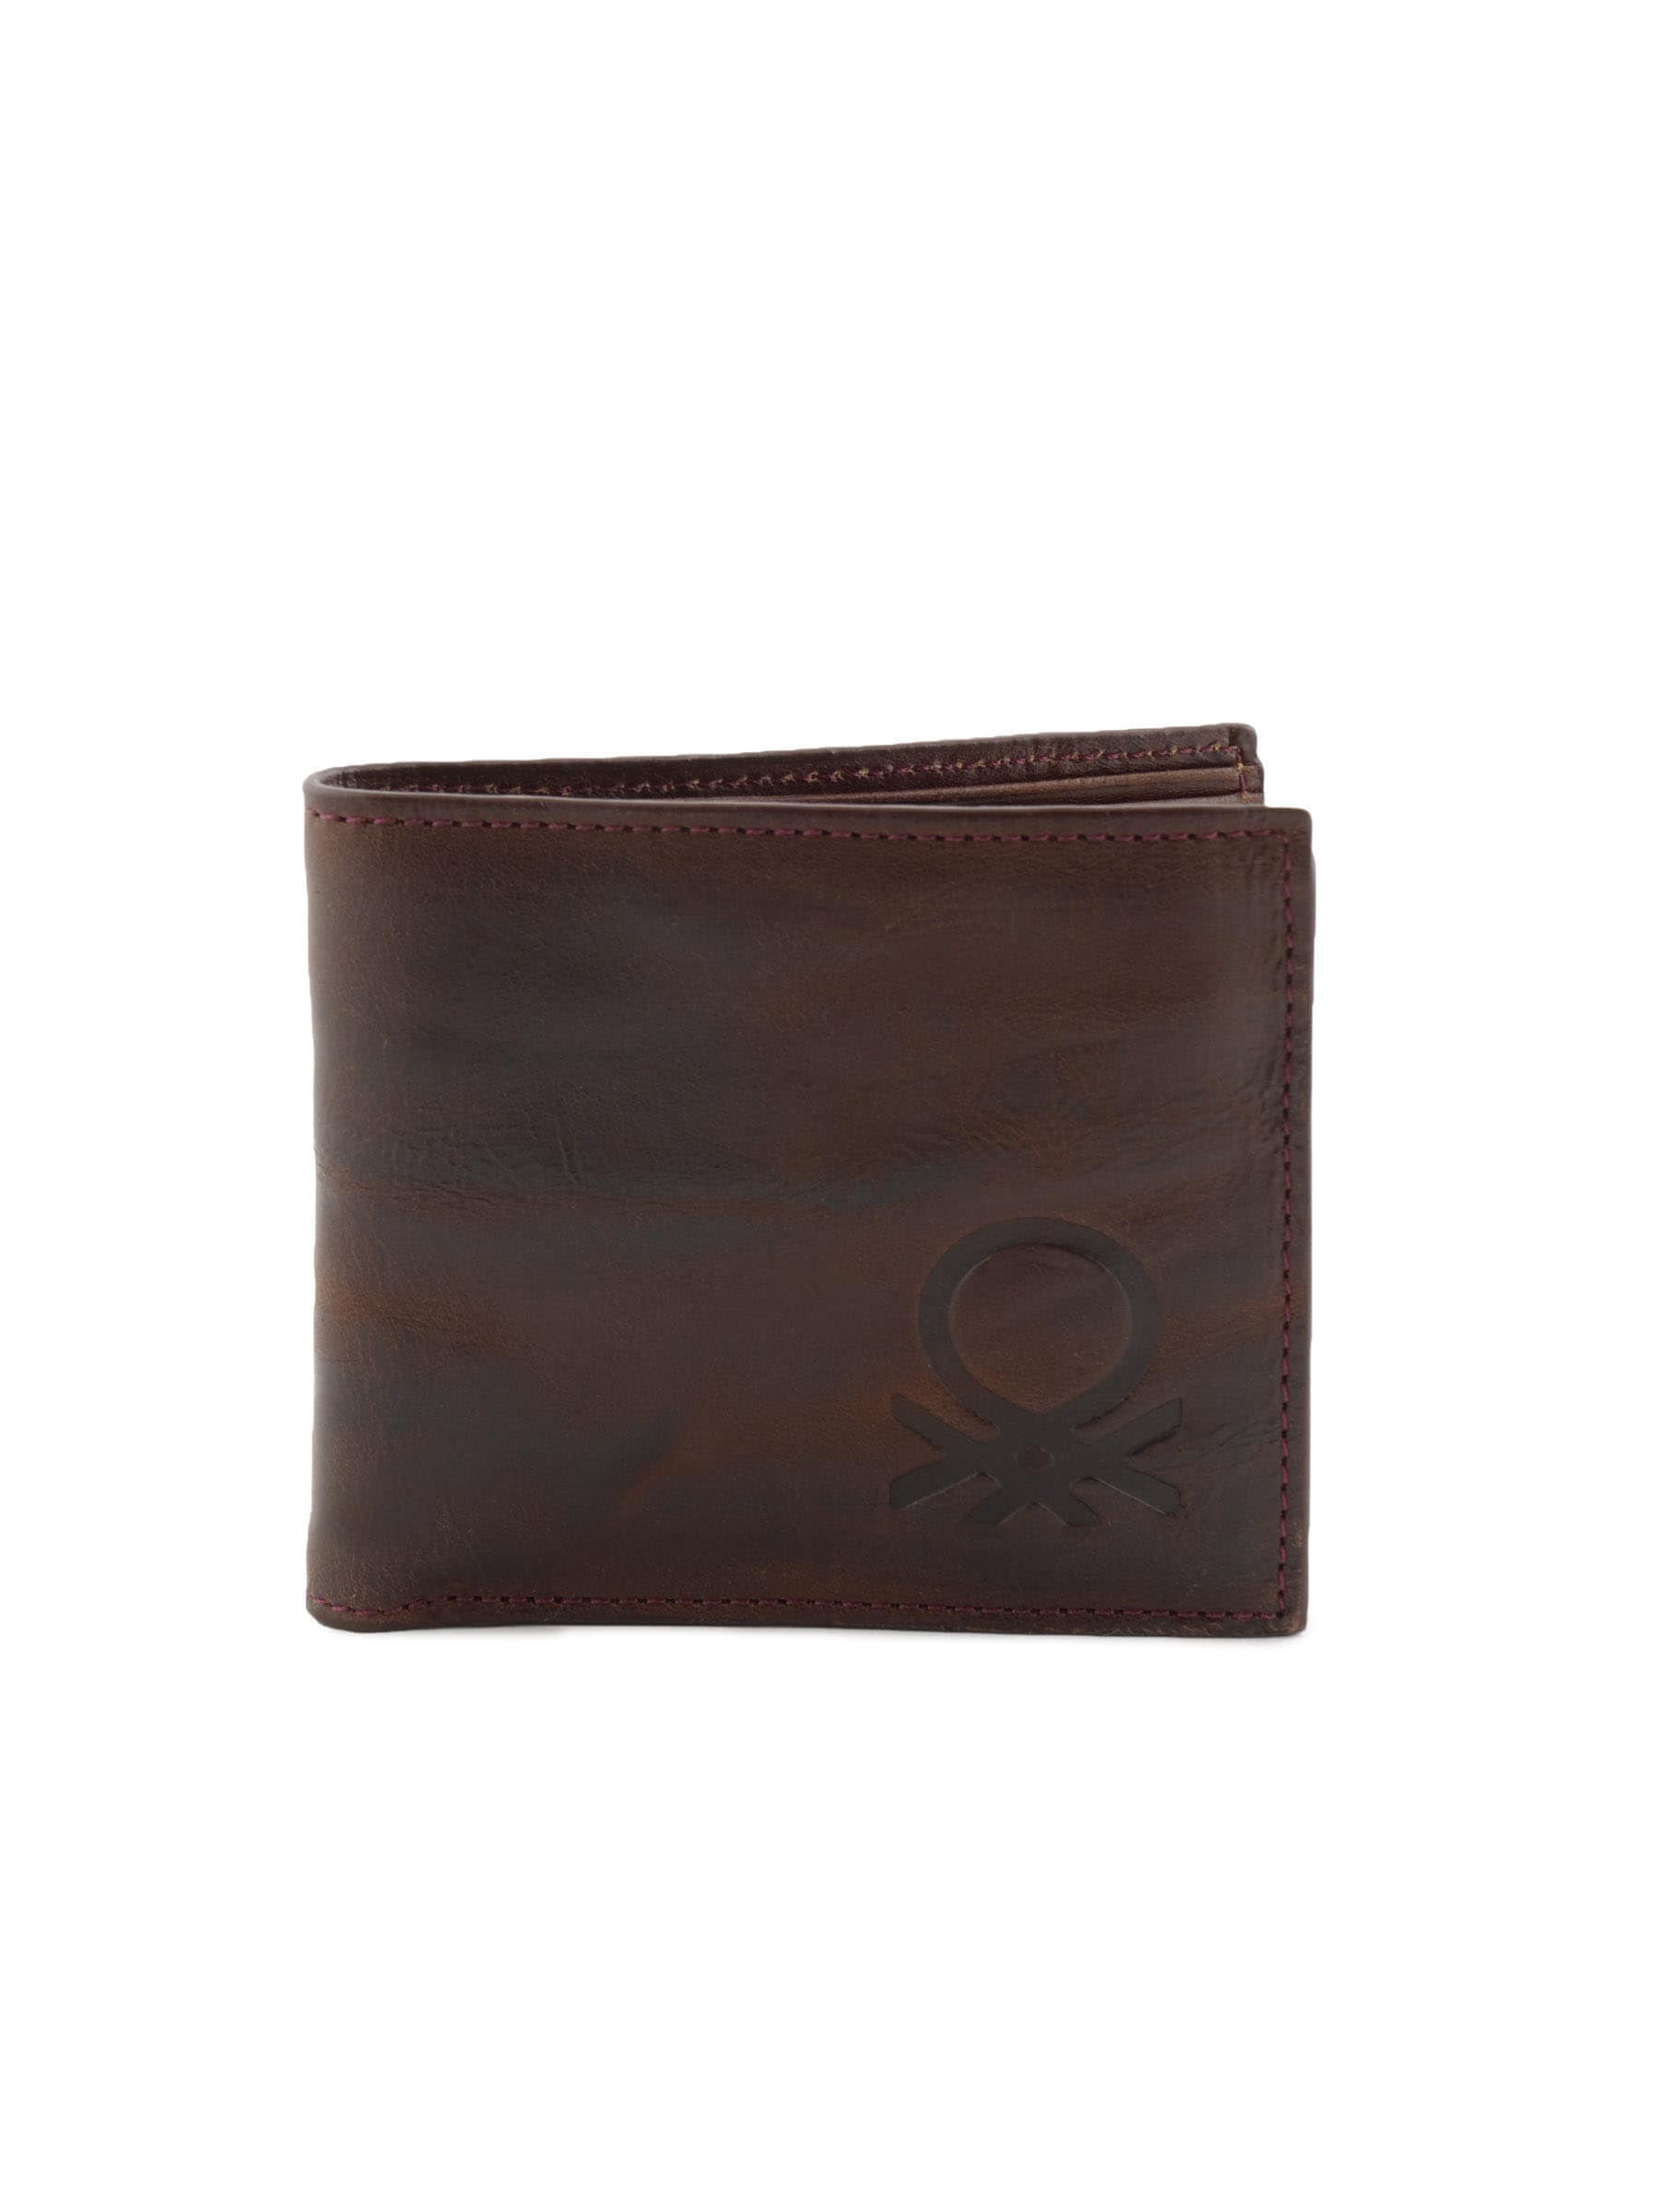 United Colors of Benetton Men Casual Brown Wallet